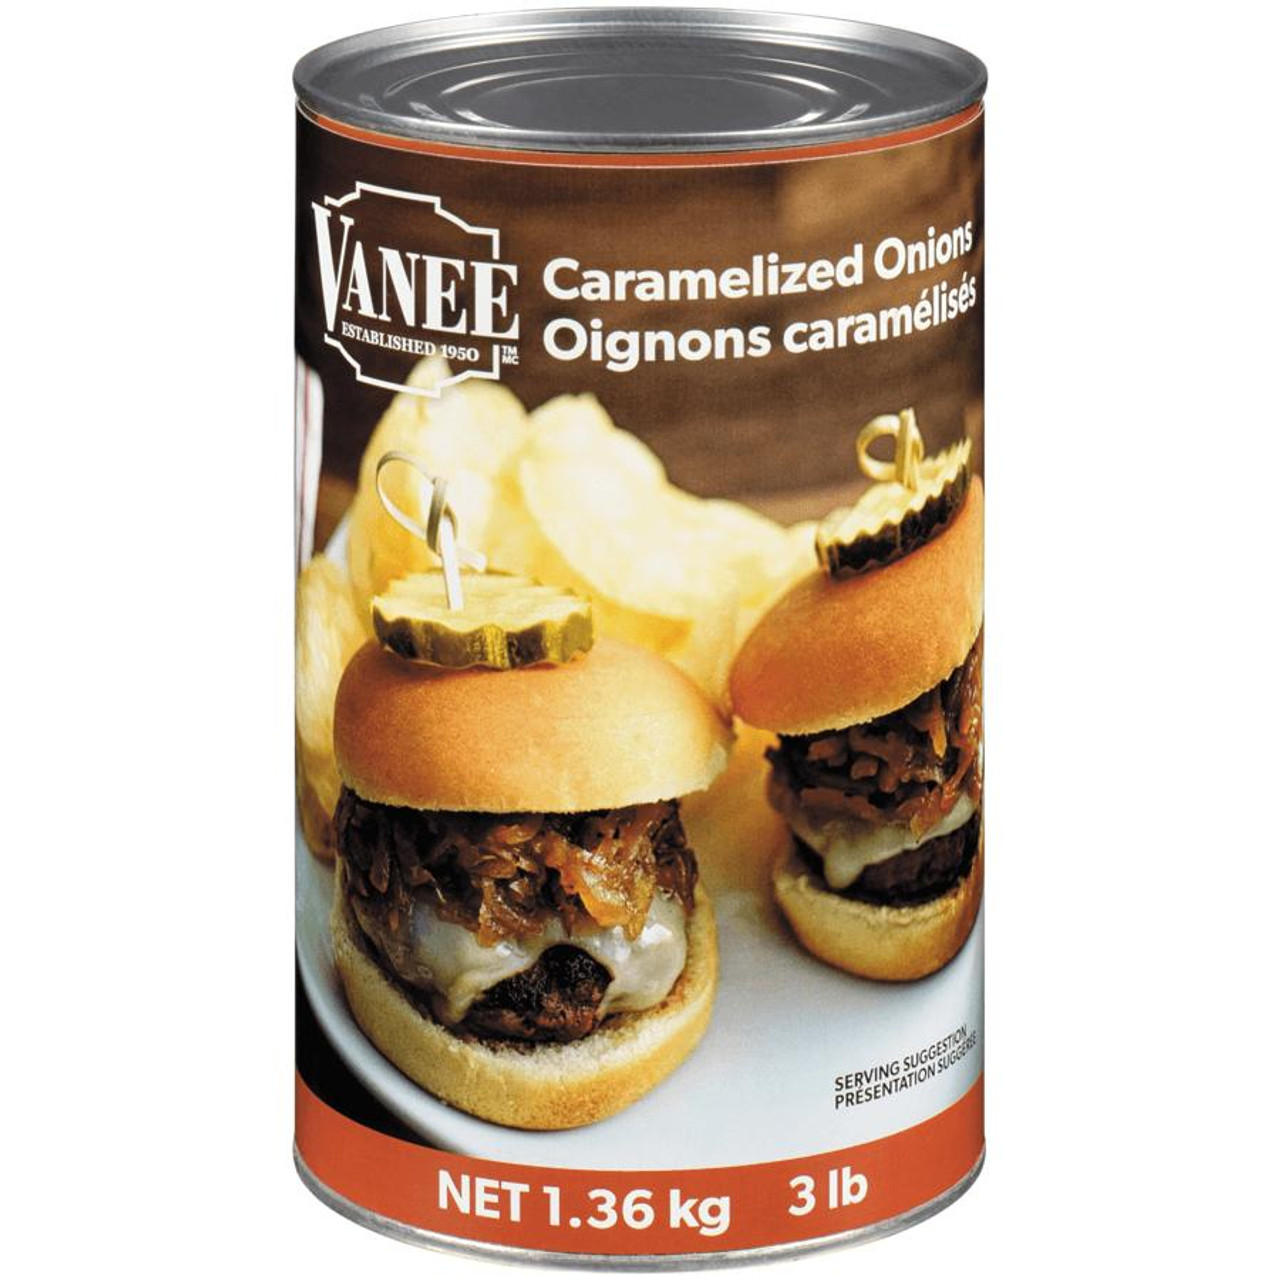  VANEE Caramelized Onion Topping 1.36Kg/3 Lbs (6/Case) 